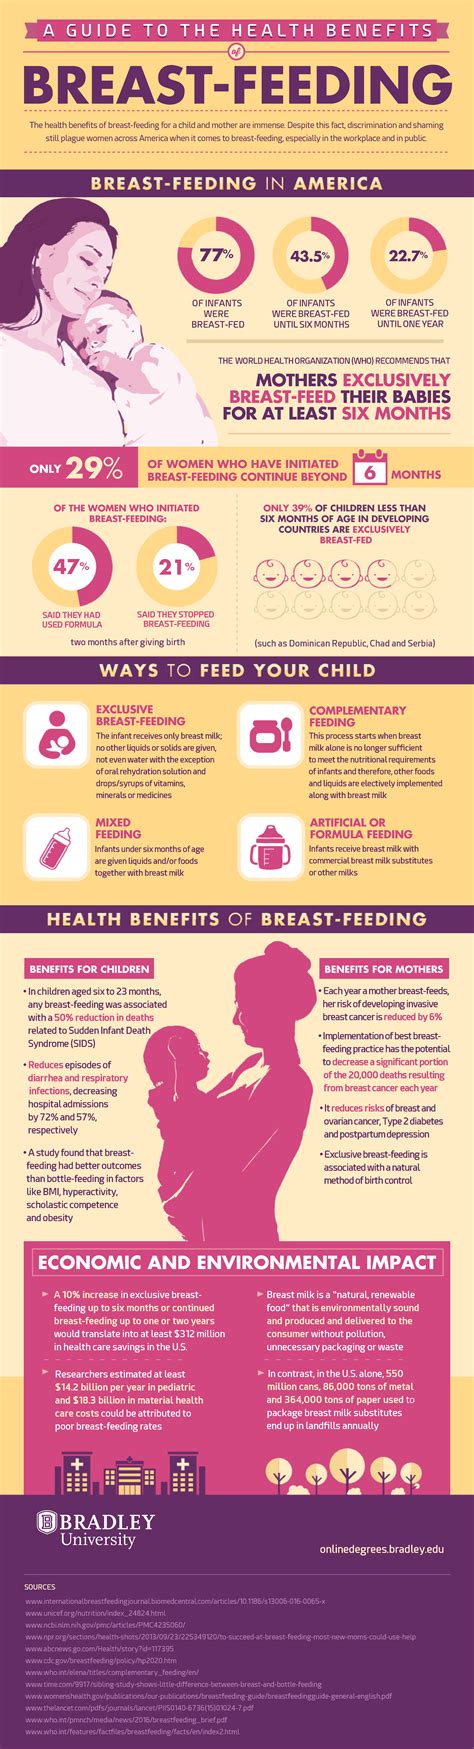 Breastfeeding Matters An Important Guide To Breastfee